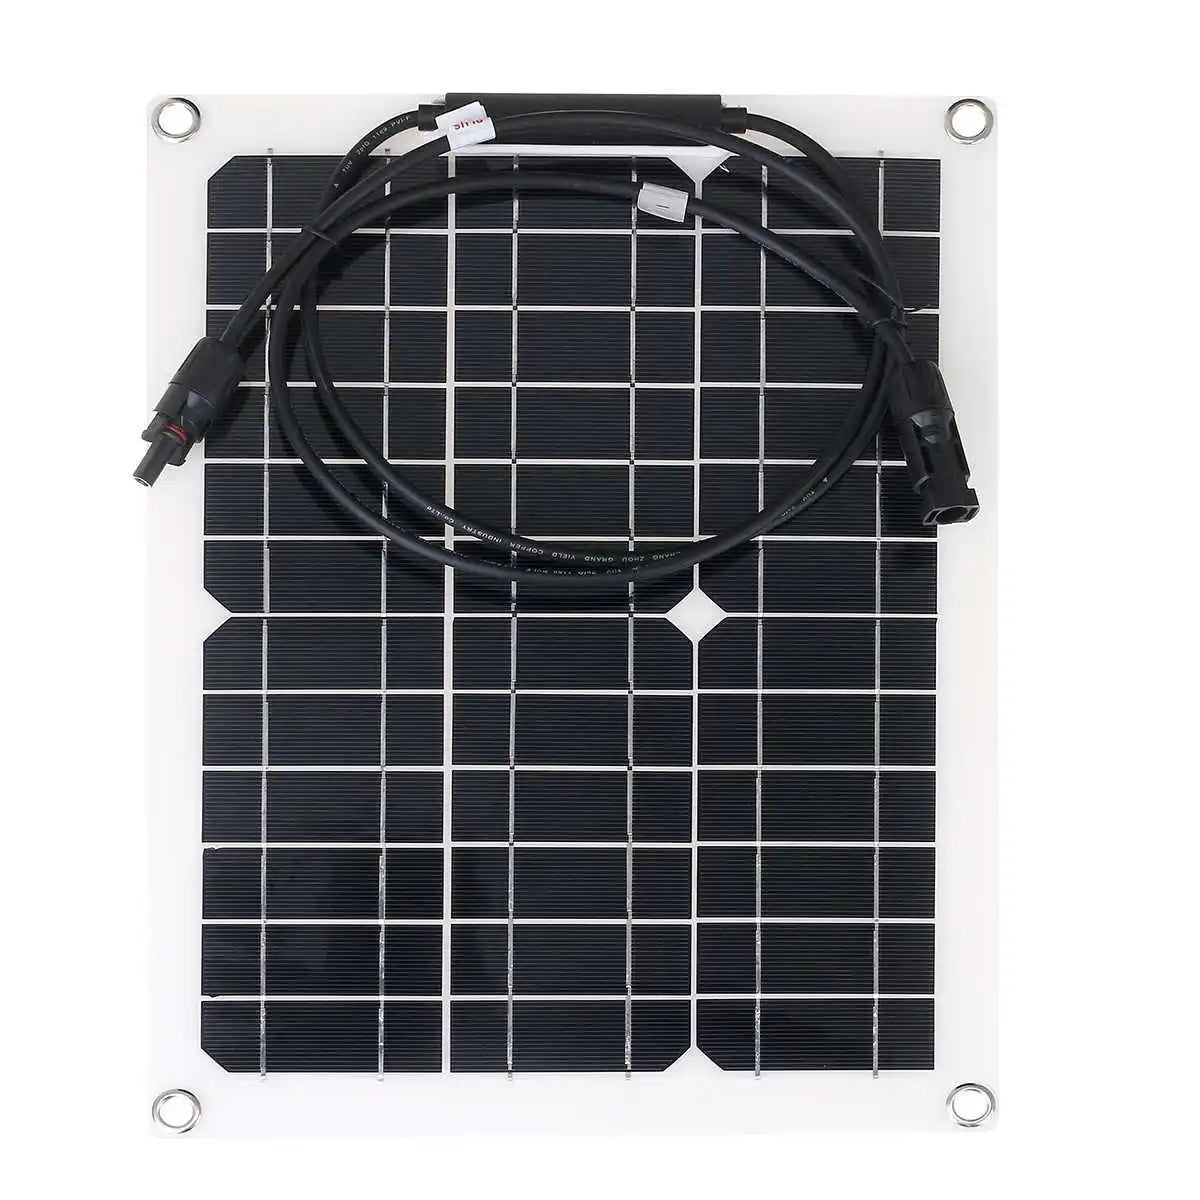 600W/300W Solar Panel, Easy connection with solar panel leads for simple setup.